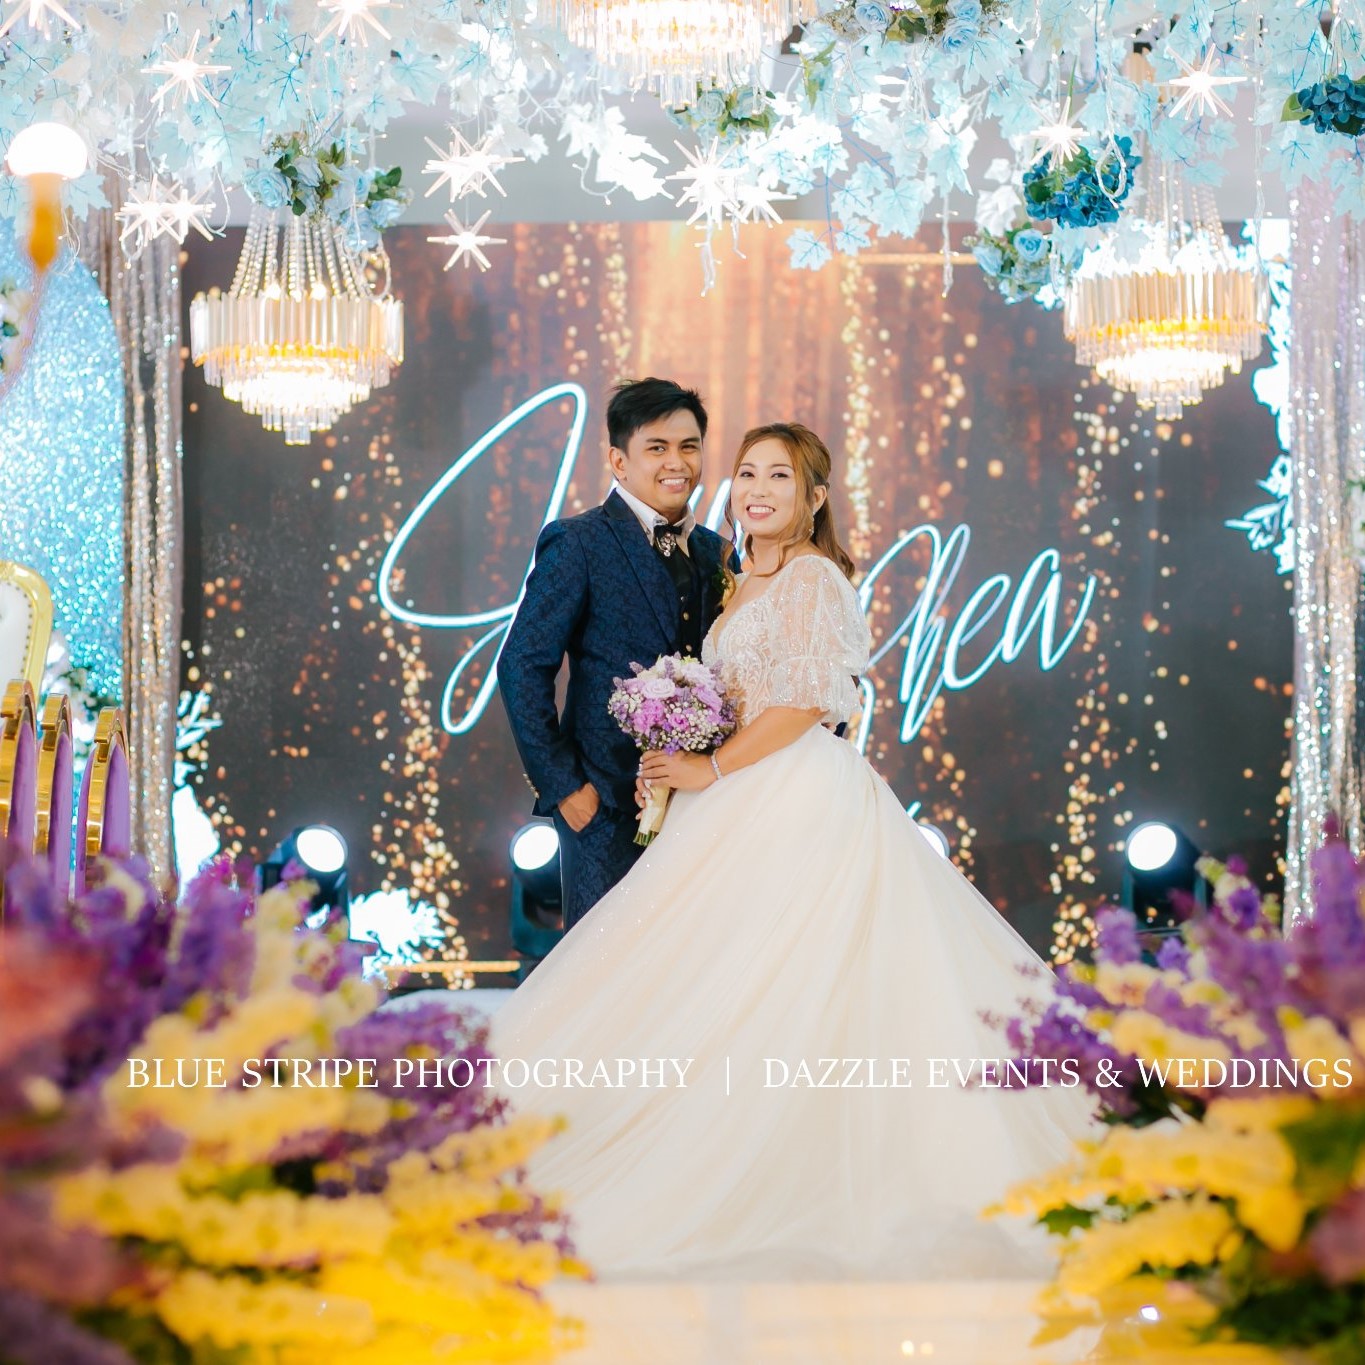 293391686 3911666312392368 2328678585165495621 n - Dazzle Events And Weddings - PROMOPROMOPROMO Booking Period Till Jan 31, 2021 Php 31,...